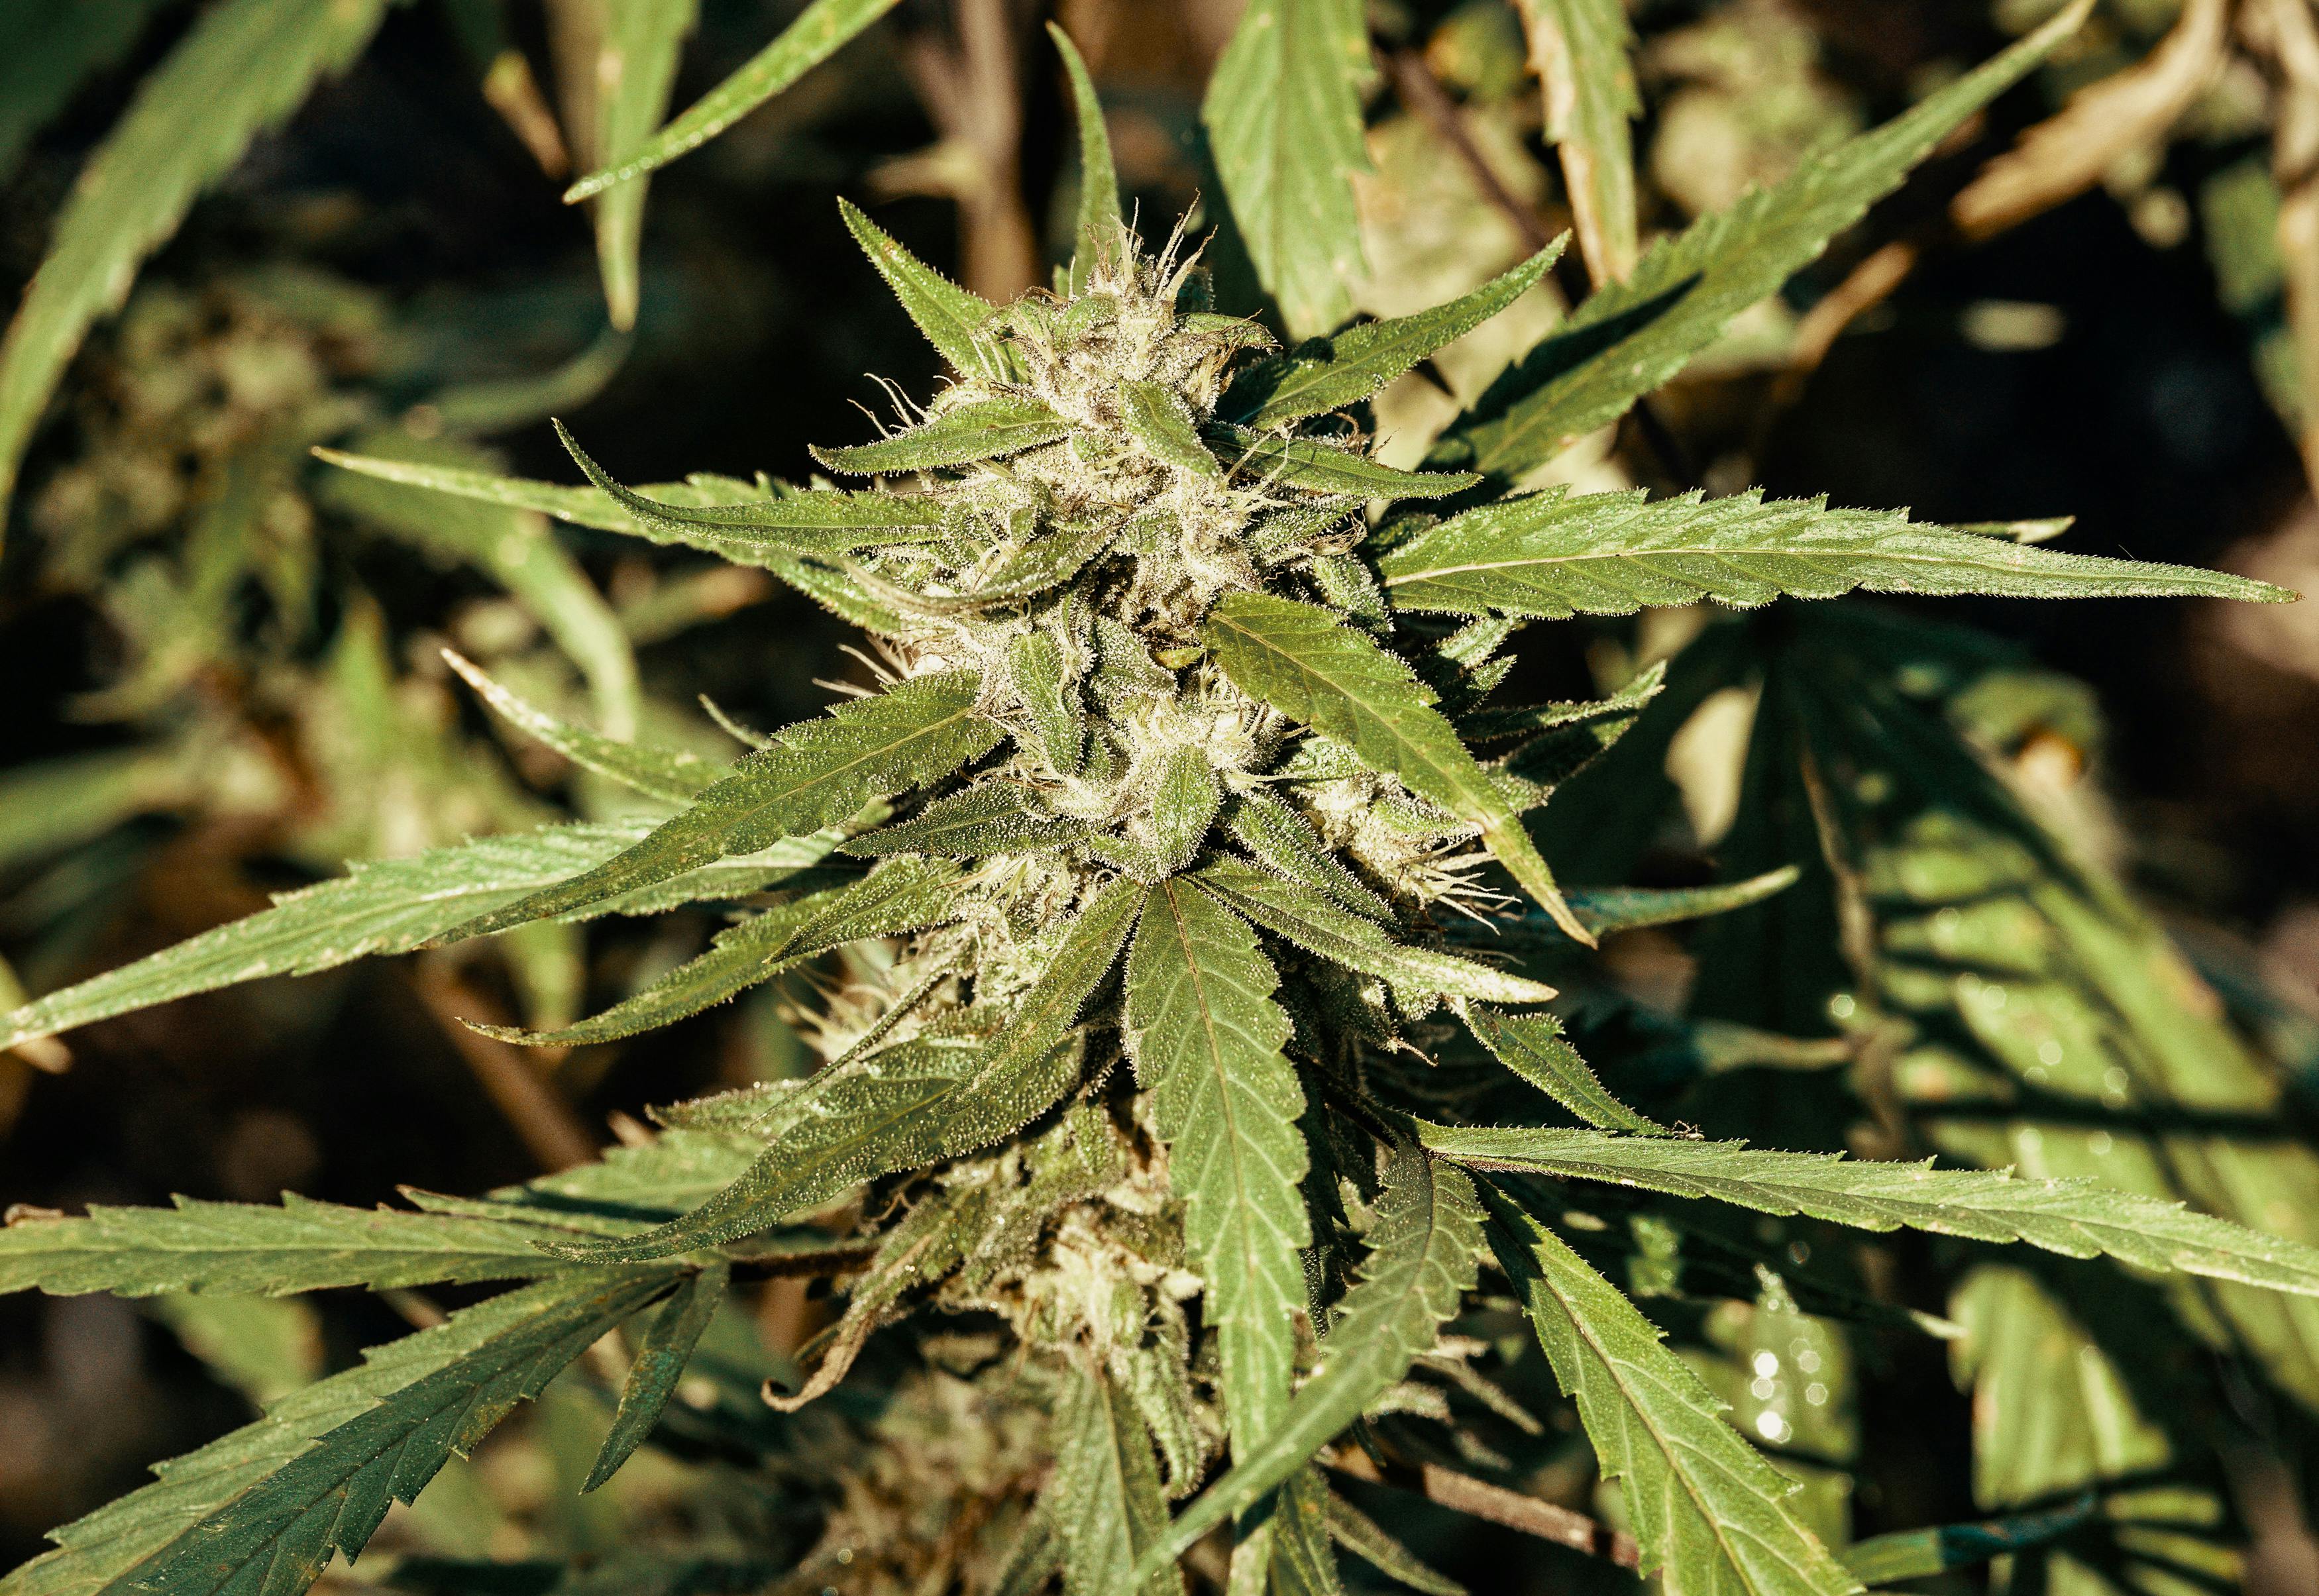 A landrace strain grows in the wild, but what are landrace strains? Find out more in this article